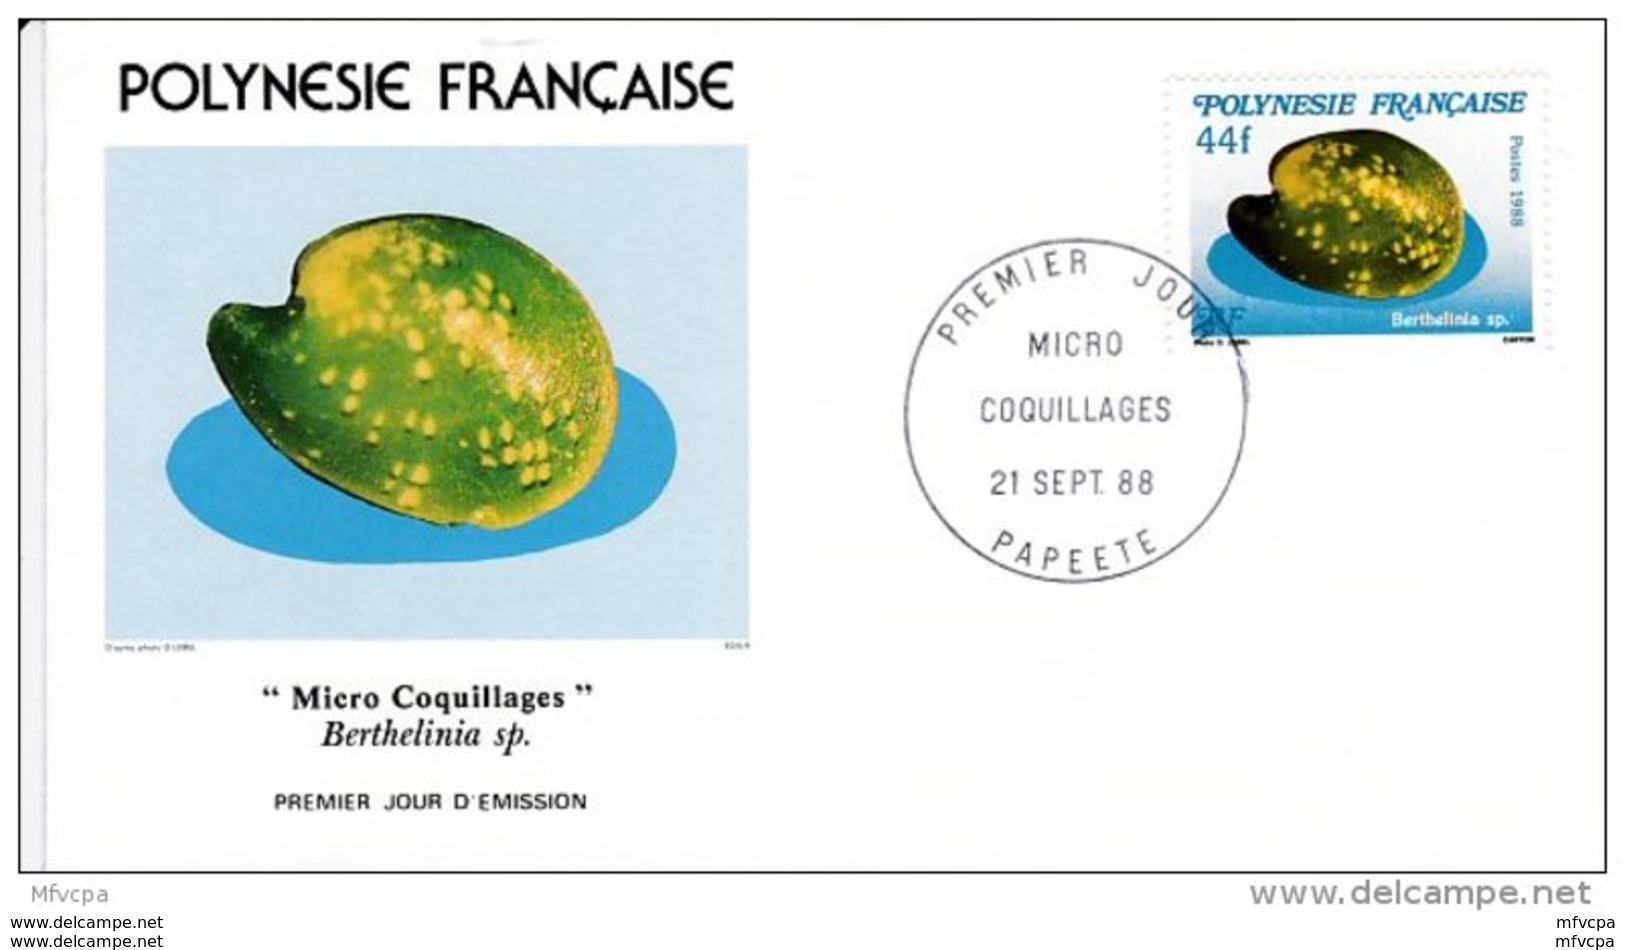 L4O218 POLYNESIE FRANCAISE 1988 Micro Coquillages FDC Berthelinia Sp, 44f Papeete 21 09 1988 / Envel.  Illus. - Coquillages